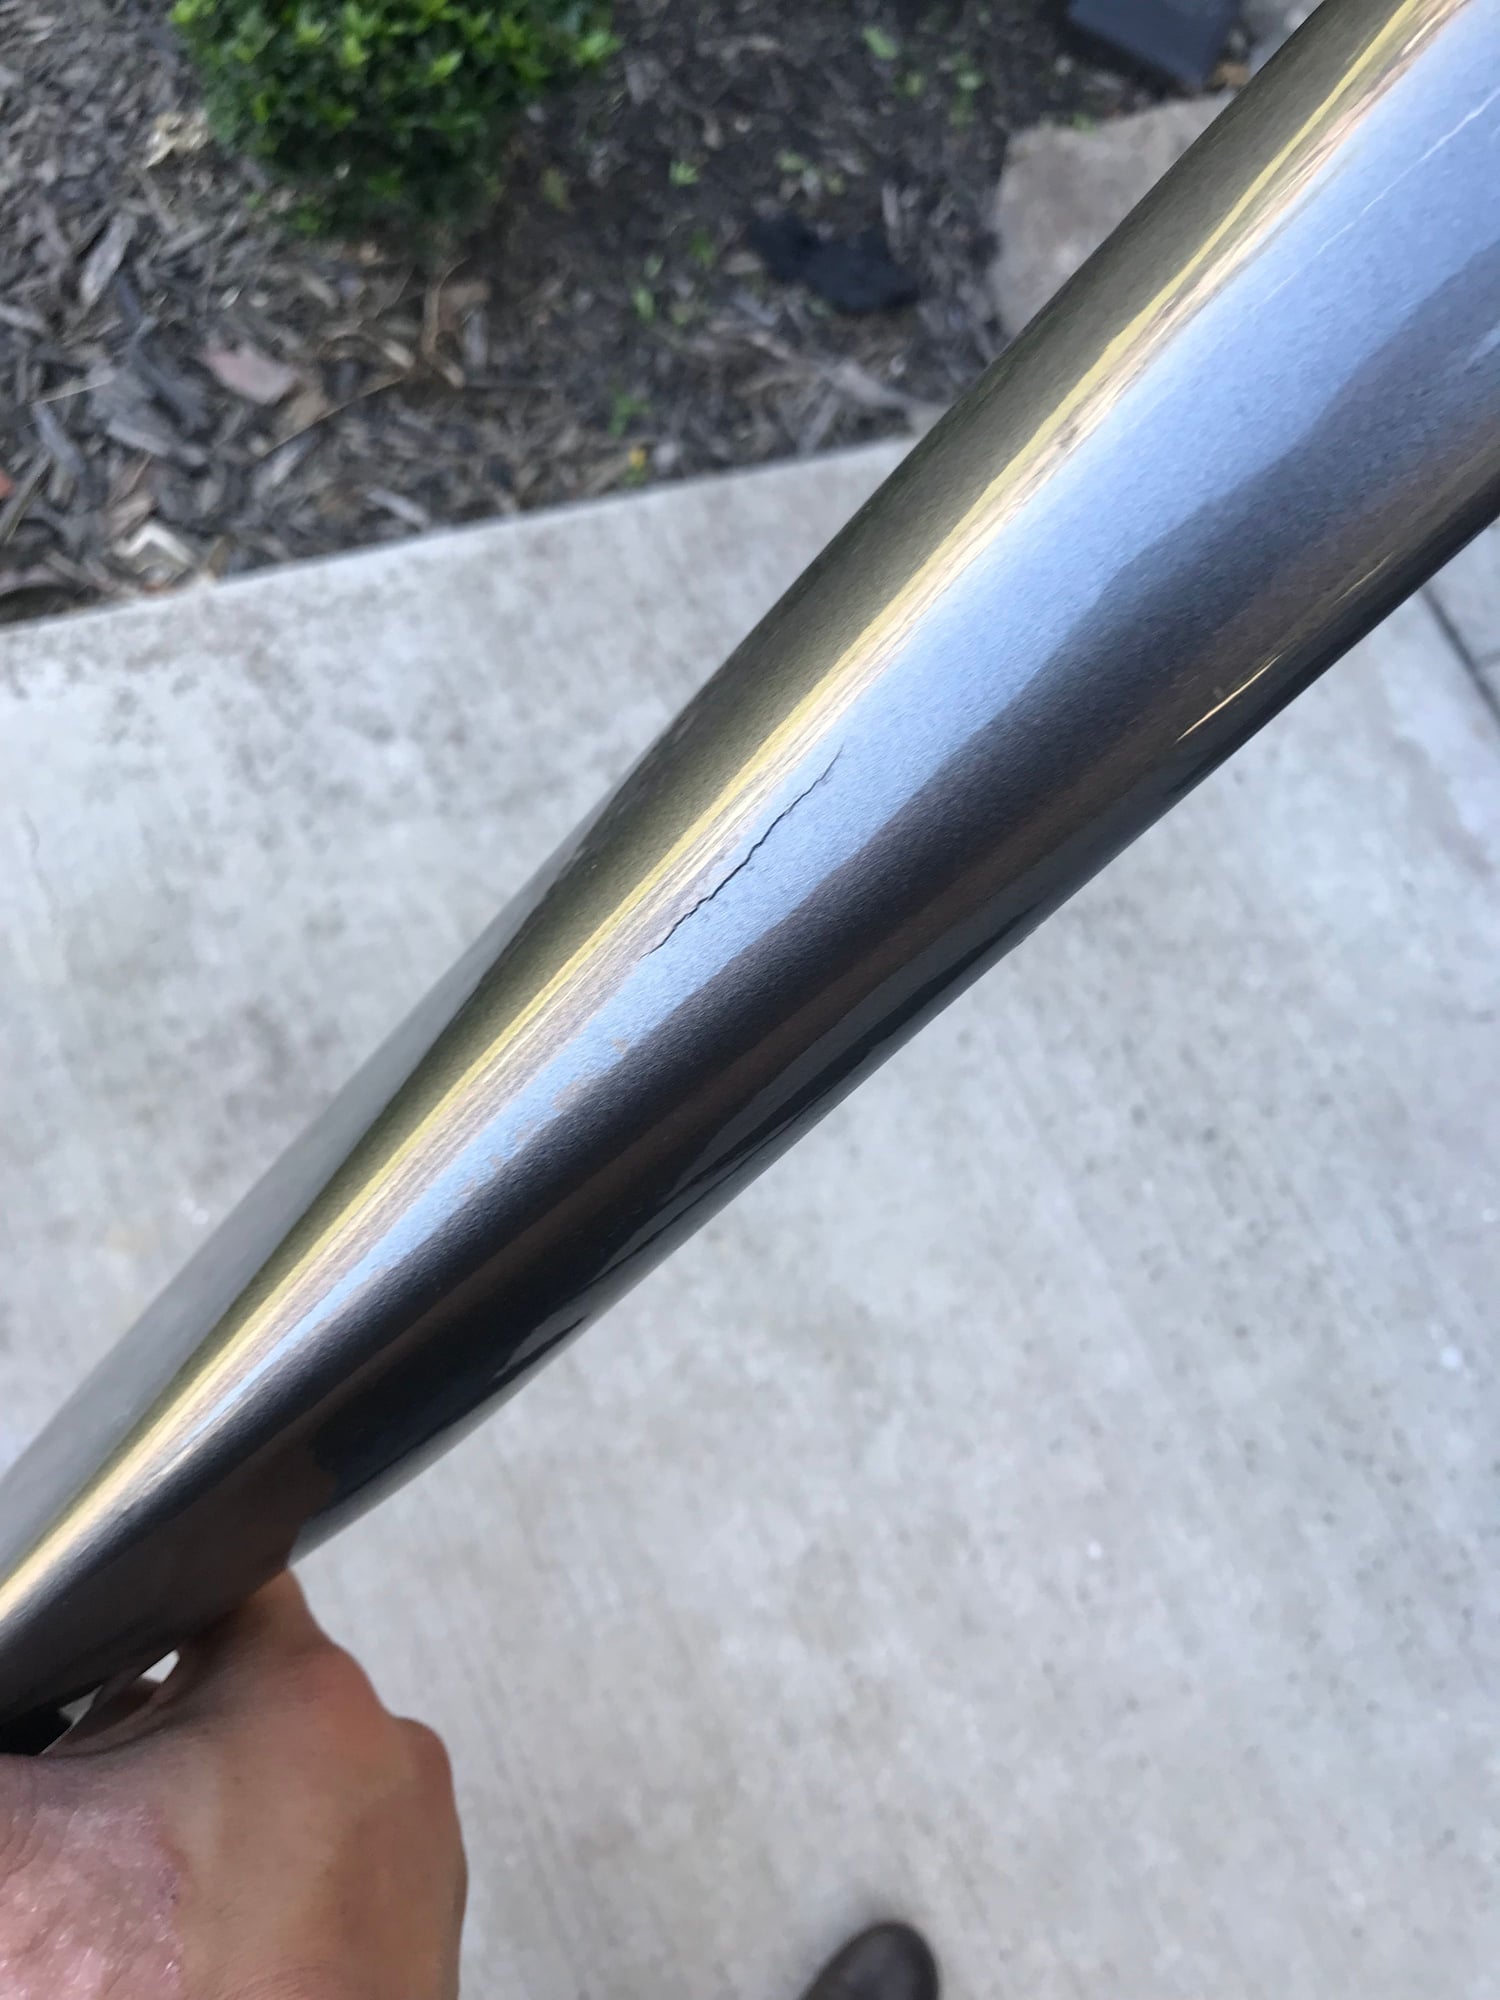 Exterior Body Parts - FS: 3G TL Endless RPM Trunk Duckbill - Used - 2004 to 2008 Acura TL - Pleasanton, CA 94526, United States